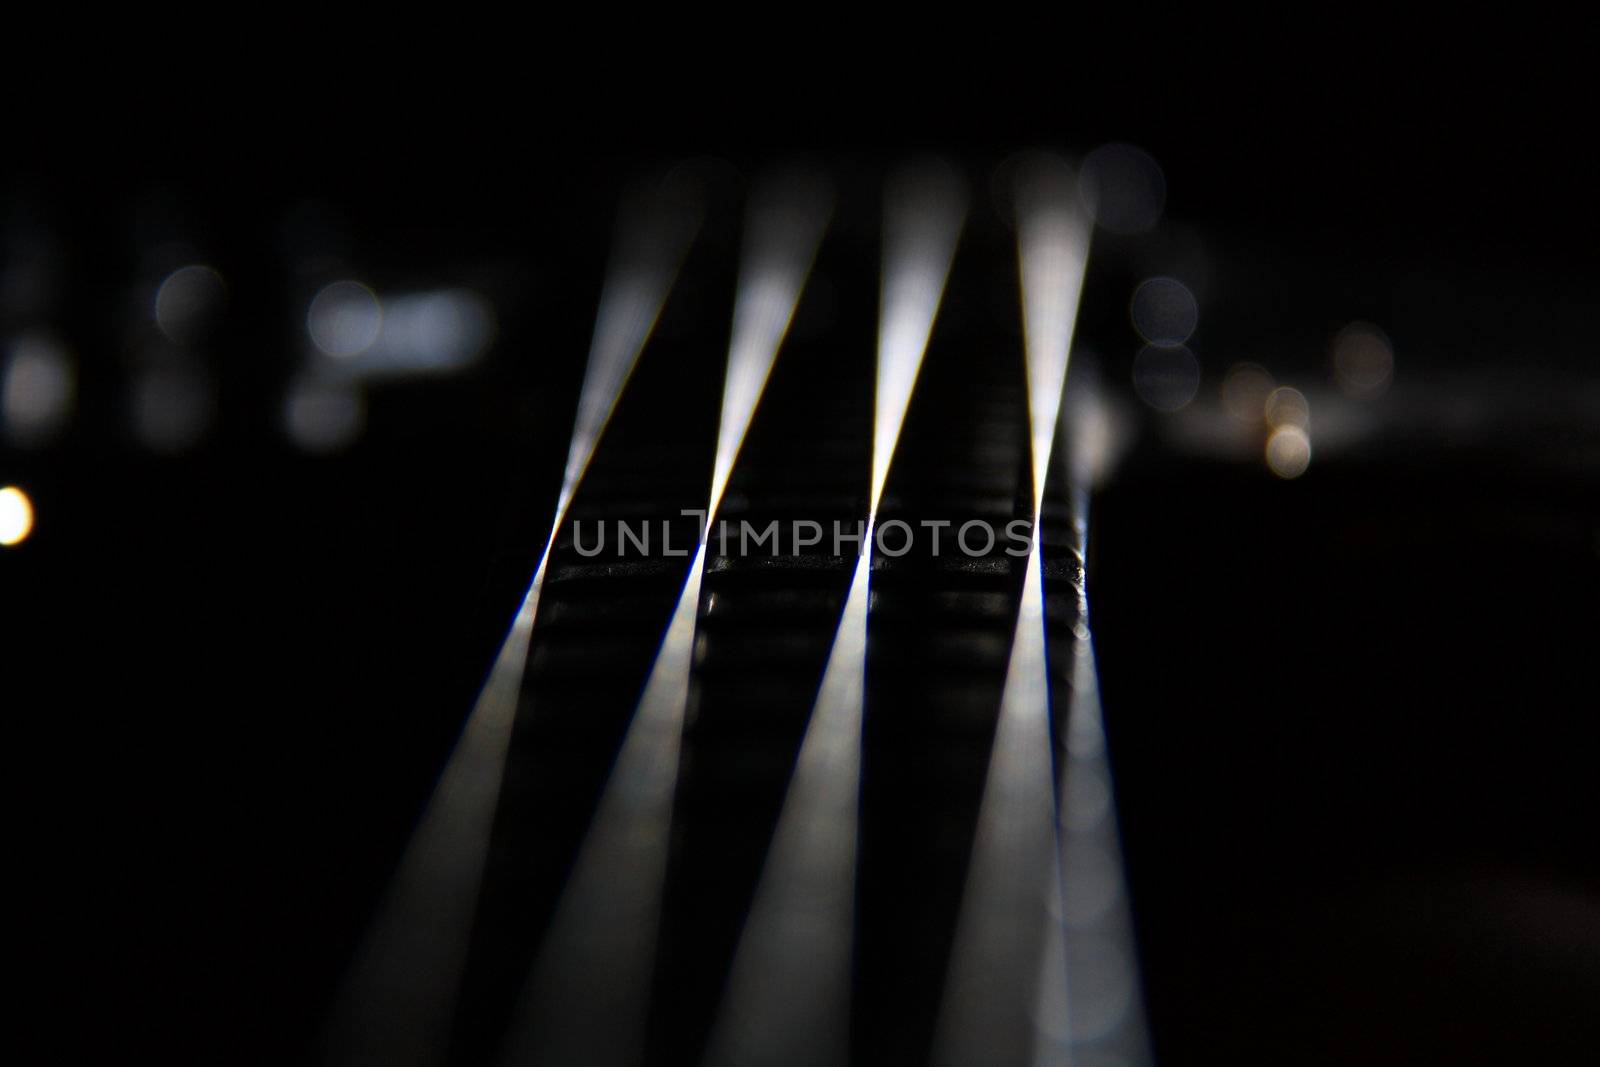 bass guitar with strings by mturhanlar